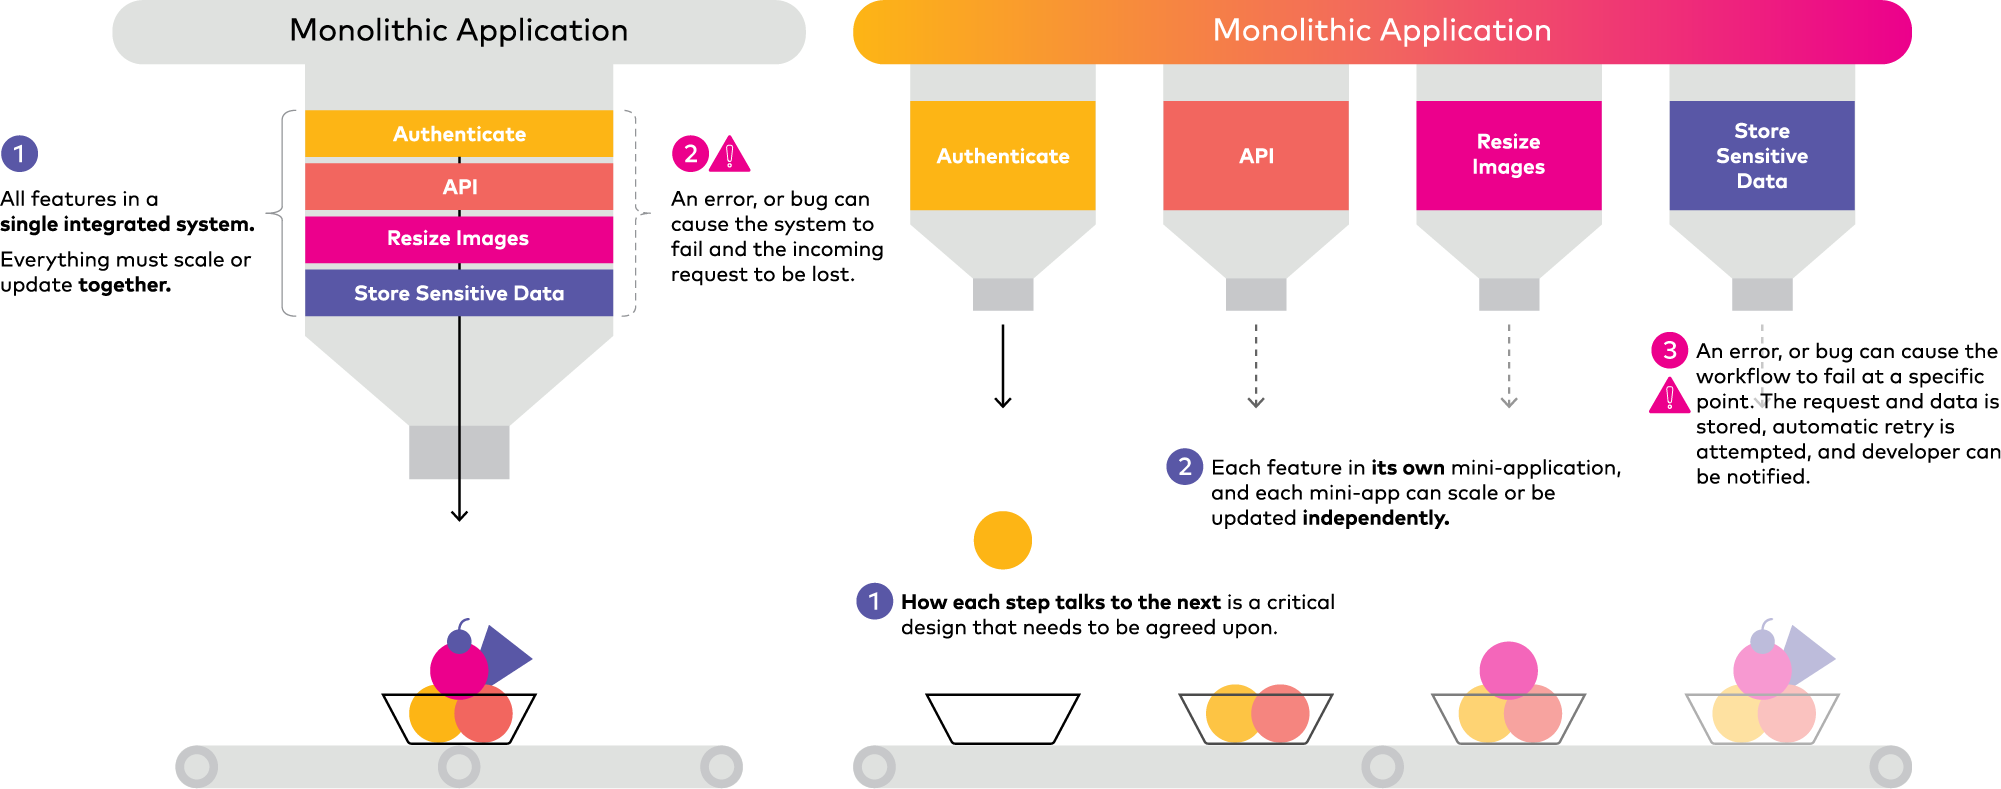 Figure 1. Representation of monolithic applications versus microservice-based applications